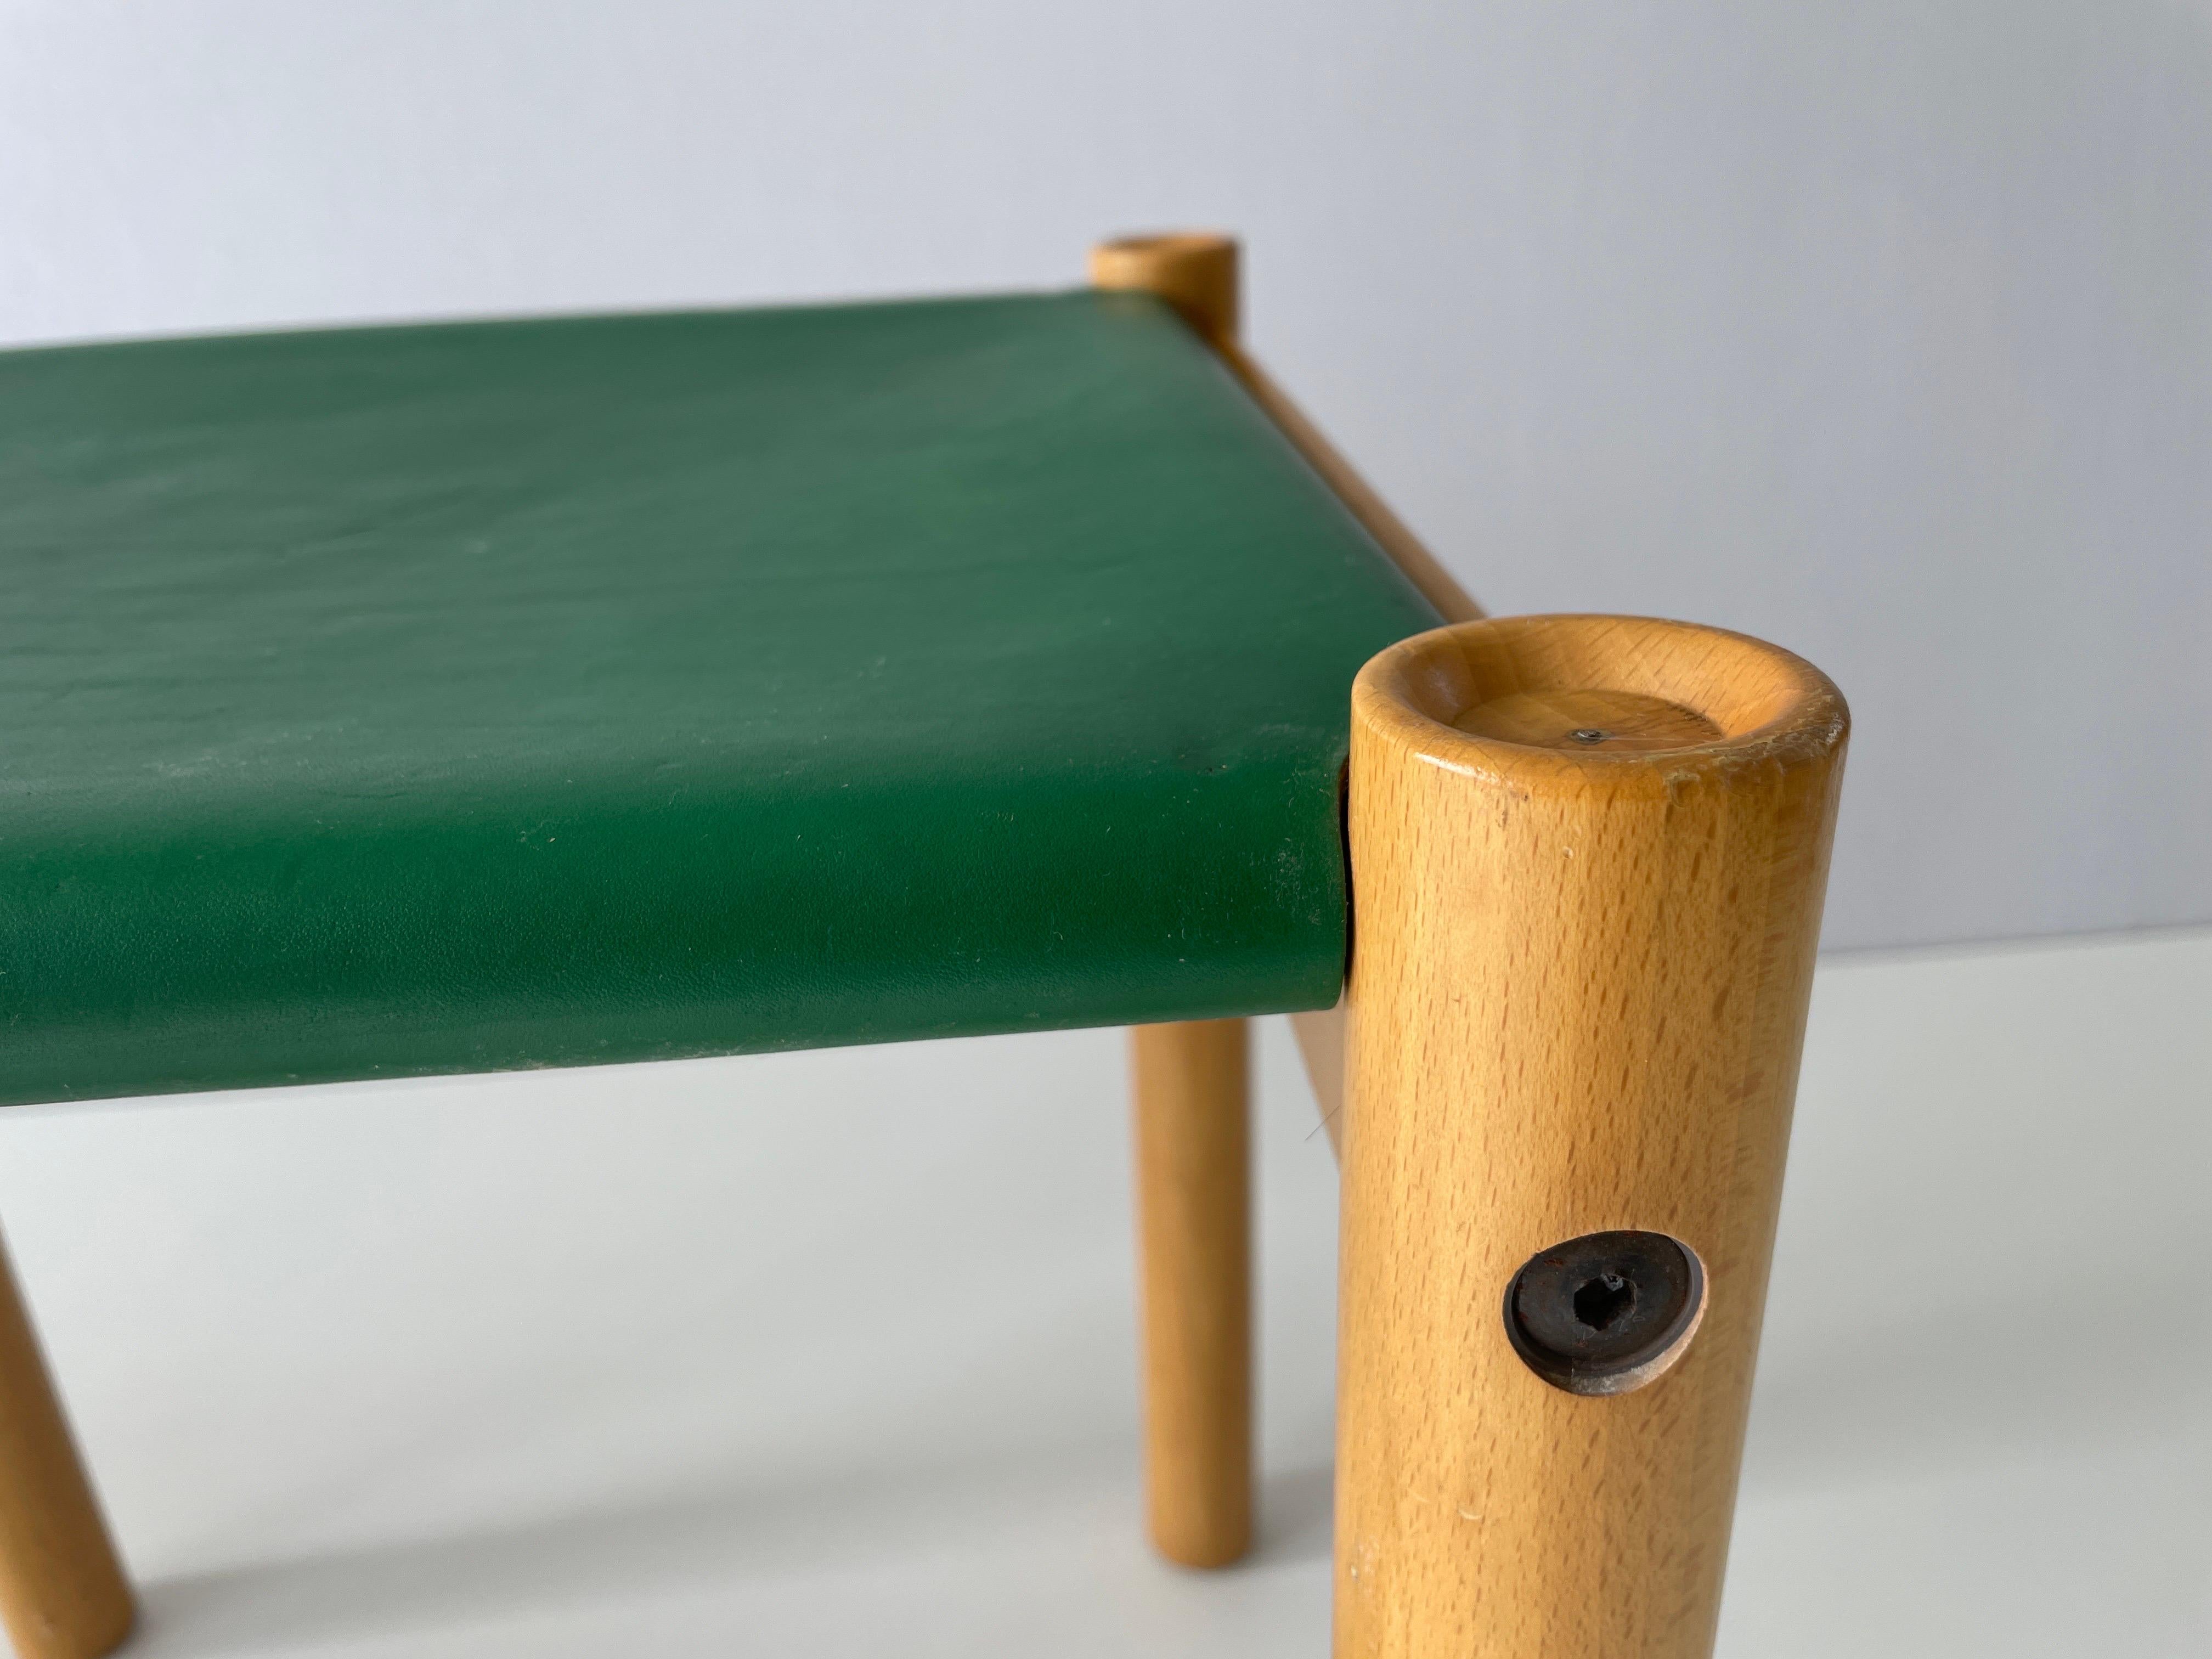 Green Leather and Birch Wood Pair of Stools by IBISCO, 1970s, Italy For Sale 2